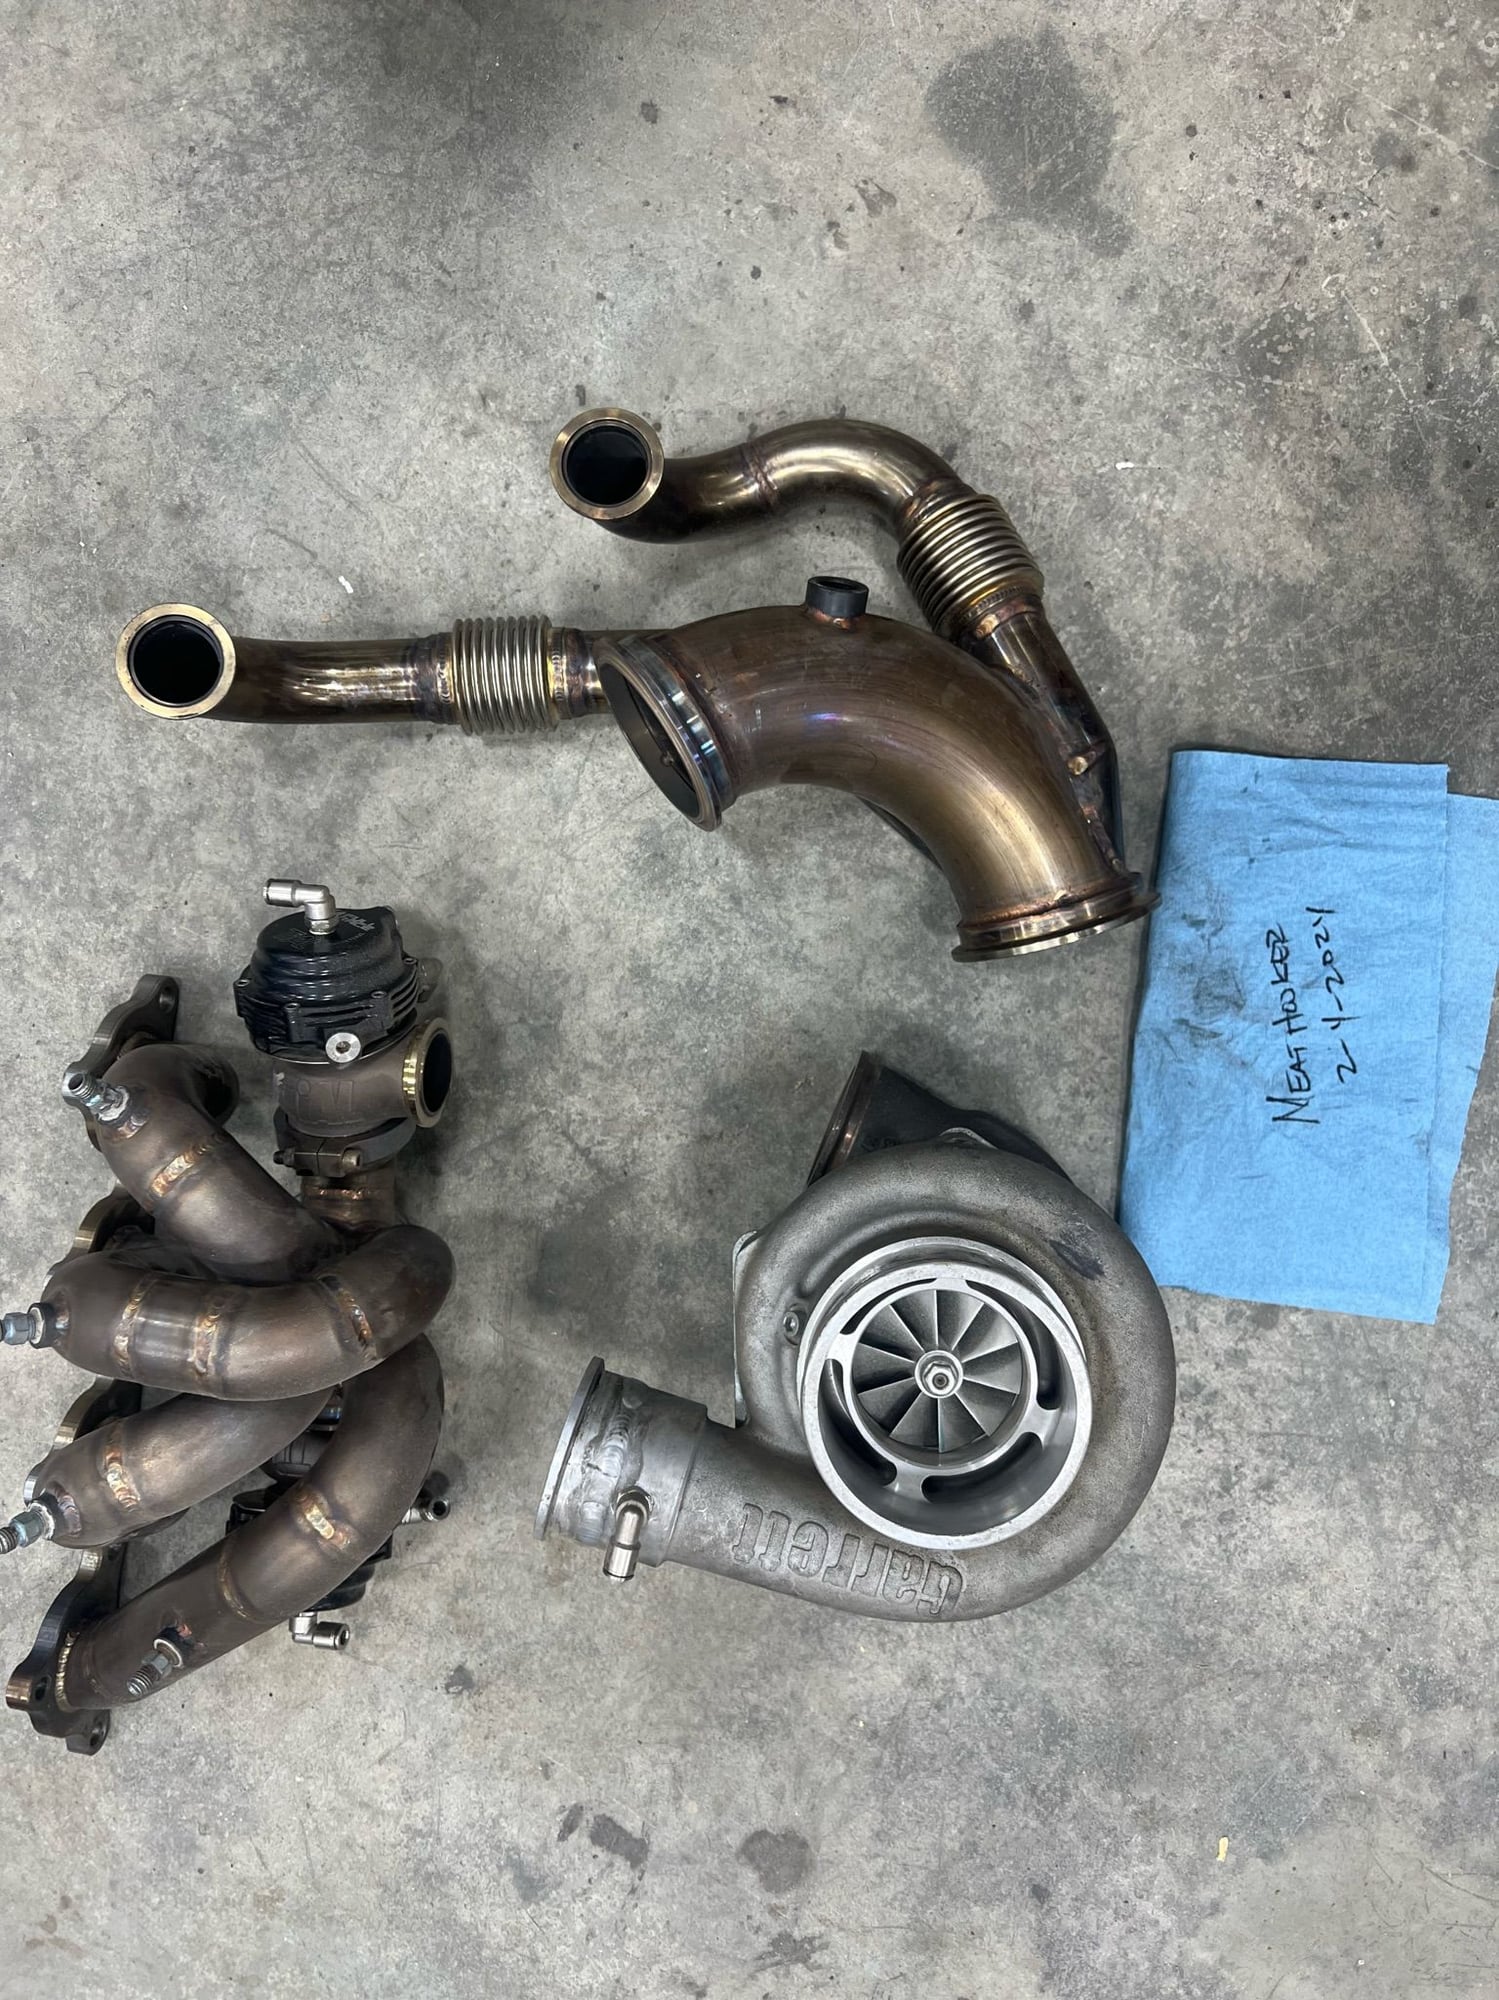 Engine - Power Adders - Gtx3582 gen 2 with Driven Fab dual WG manifold - Used - 2003 to 2006 Mitsubishi Lancer Evolution - Boise, ID 83642, United States